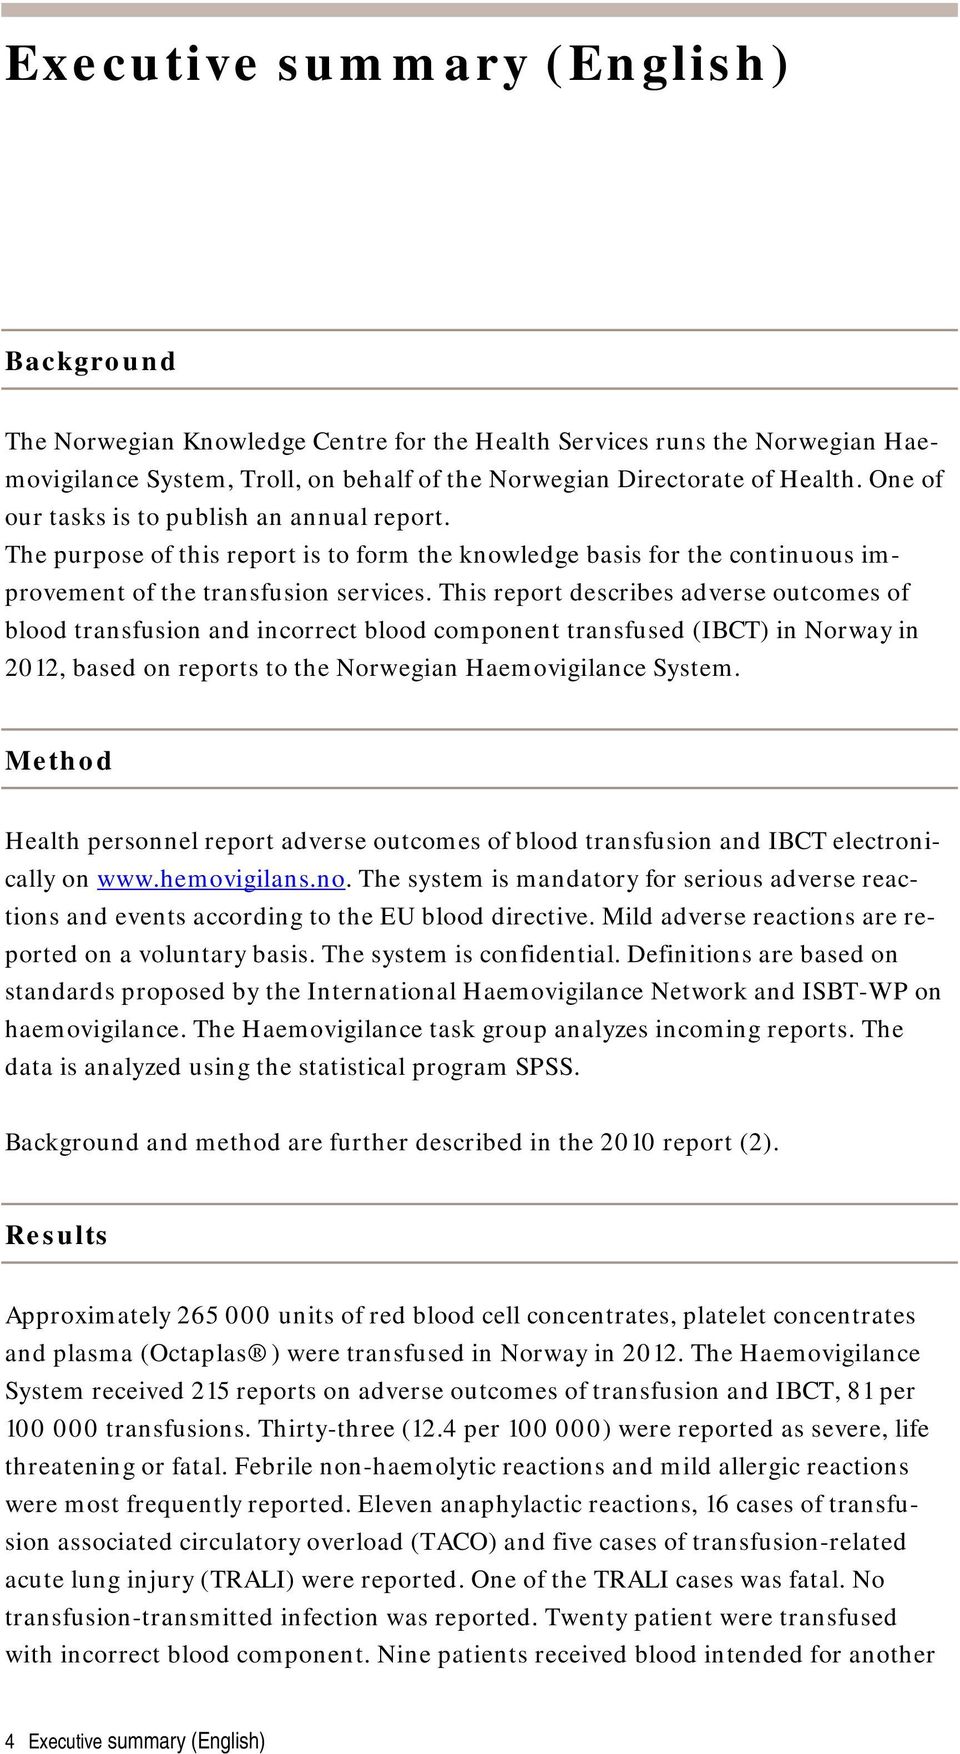 This report describes adverse outcomes of blood transfusion and incorrect blood component transfused (IBCT) in Norway in 2012, based on reports to the Norwegian Haemovigilance System.